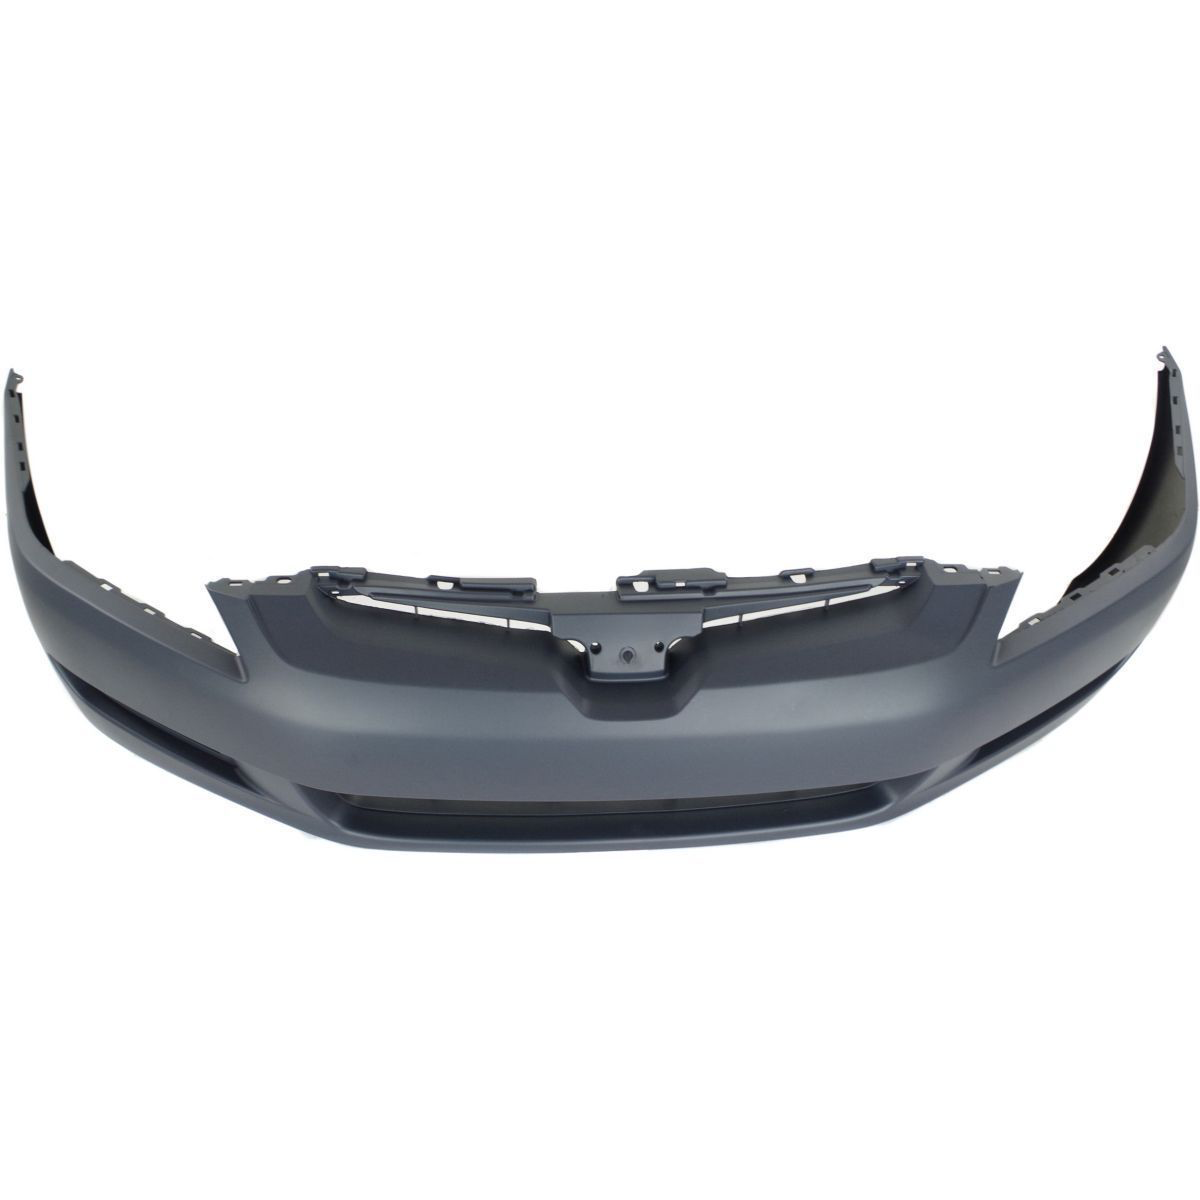 2003-2005 HONDA ACCORD Front Bumper Cover 2dr coupe  w/4 cyl engine Painted to Match